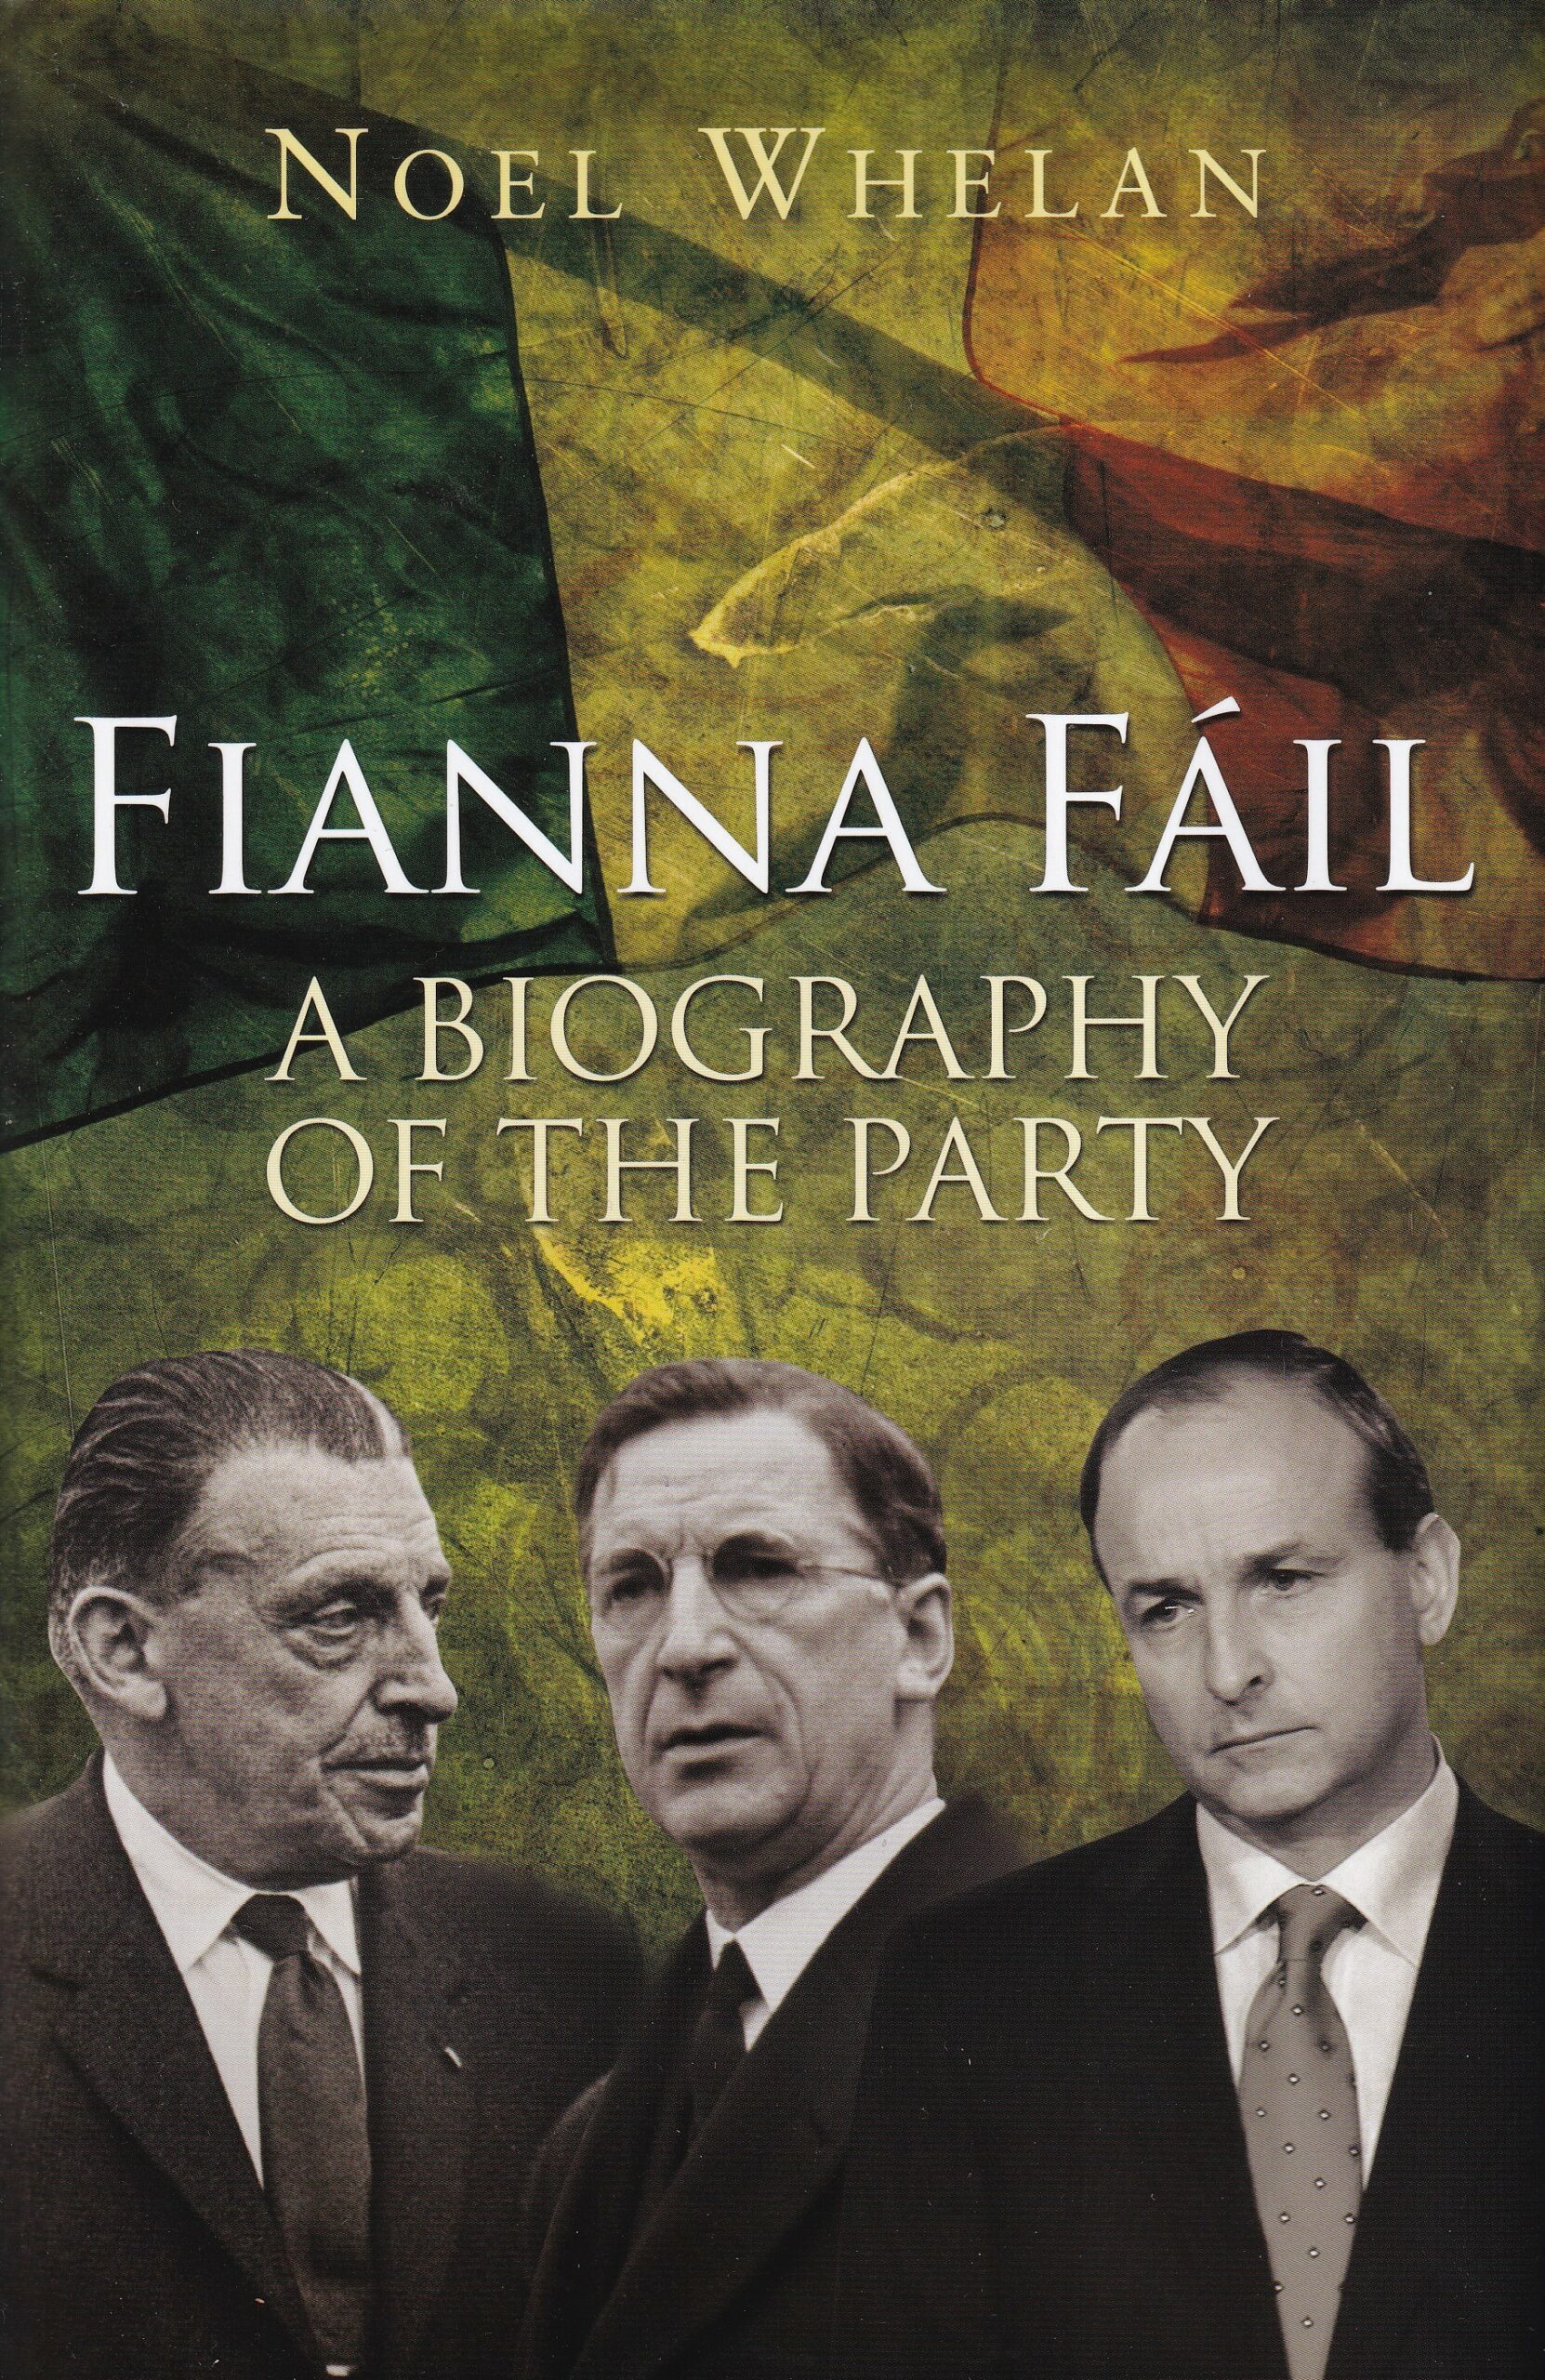 Fianna Fáil: A Biography of the Party | Noel Whelan | Charlie Byrne's